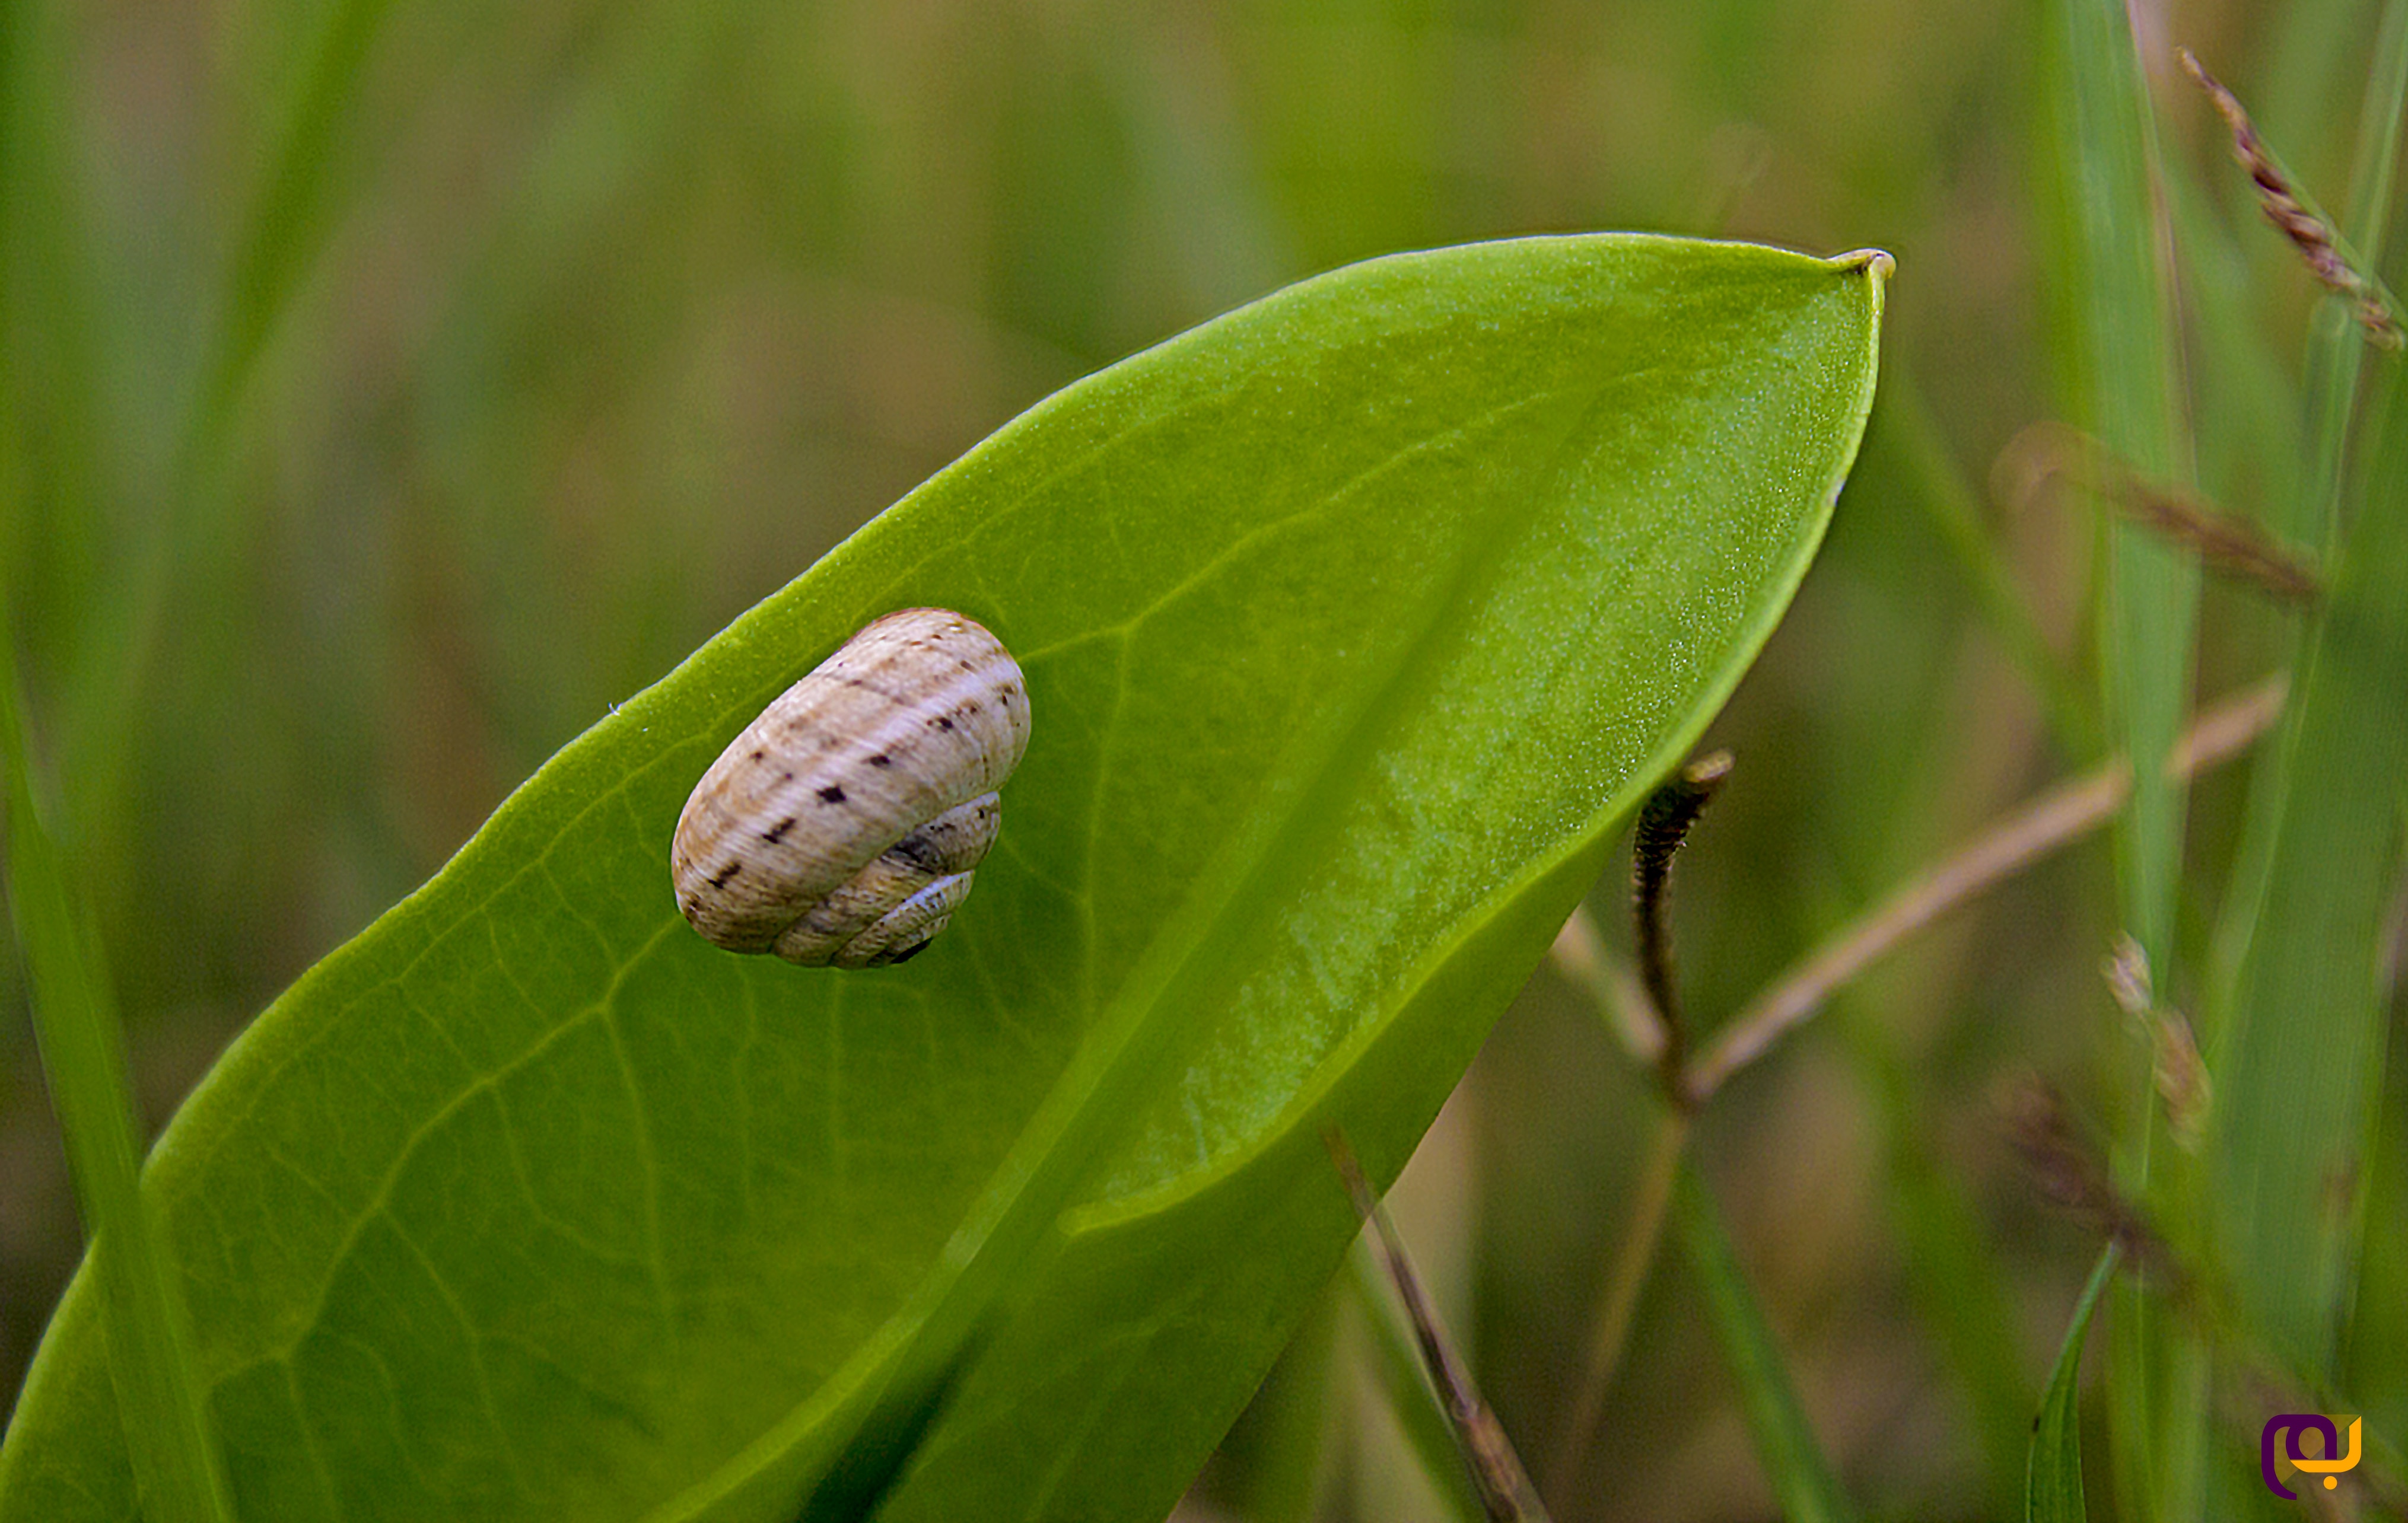 brown snail on green leaf during daytime